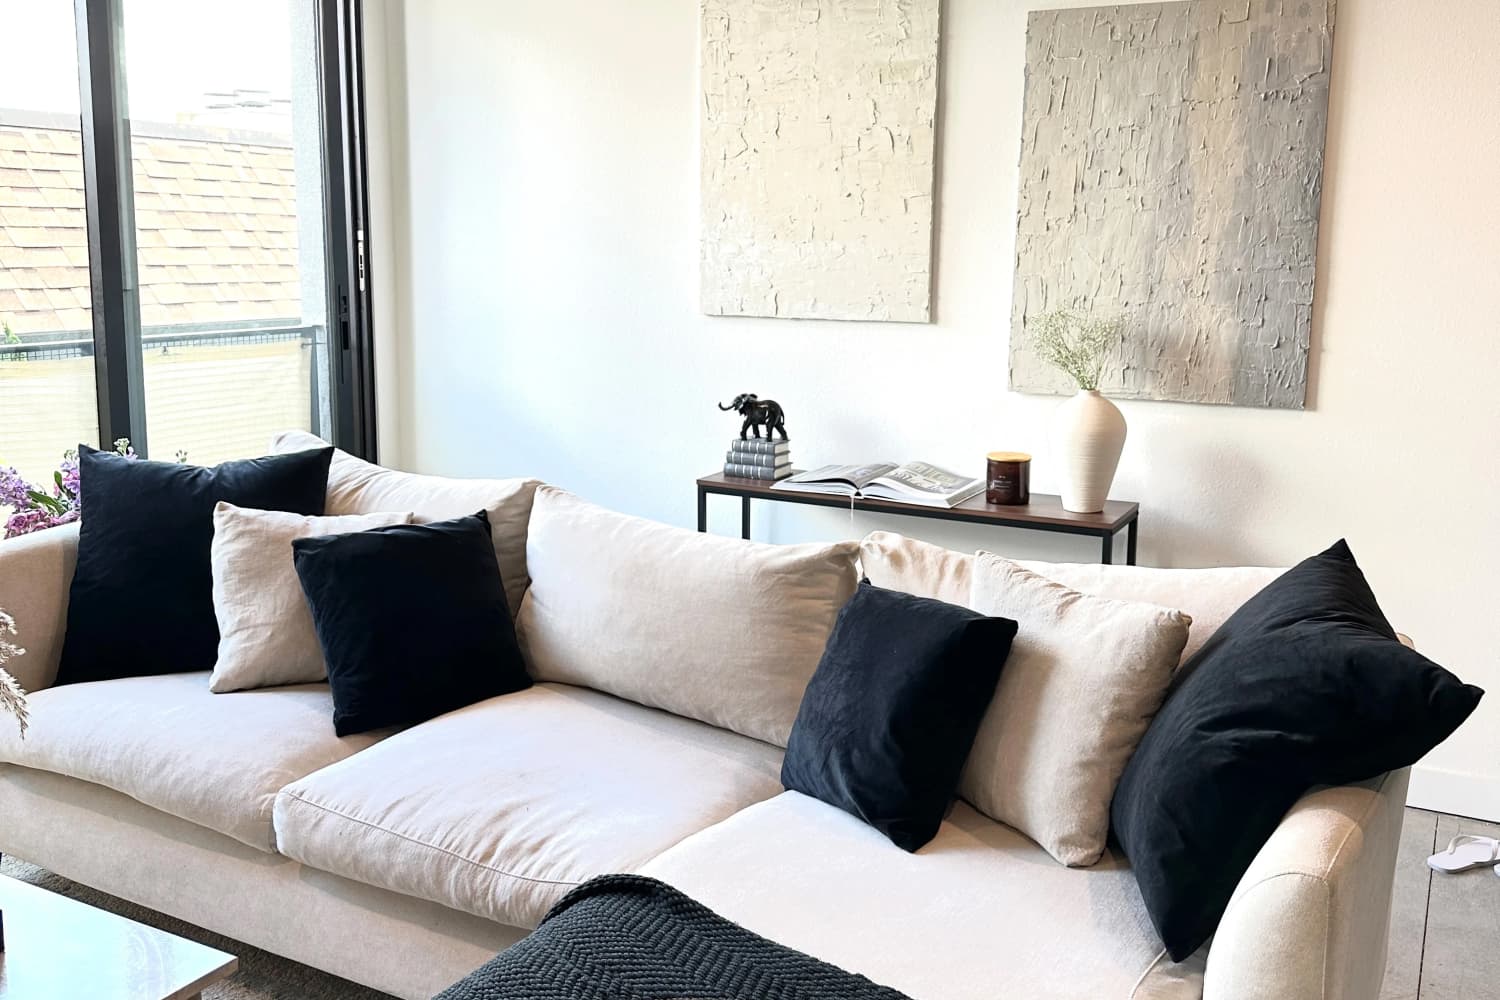 A Fashion Designer's Apartment Is a Modern, Minimal, Neutral, and Elevated Look